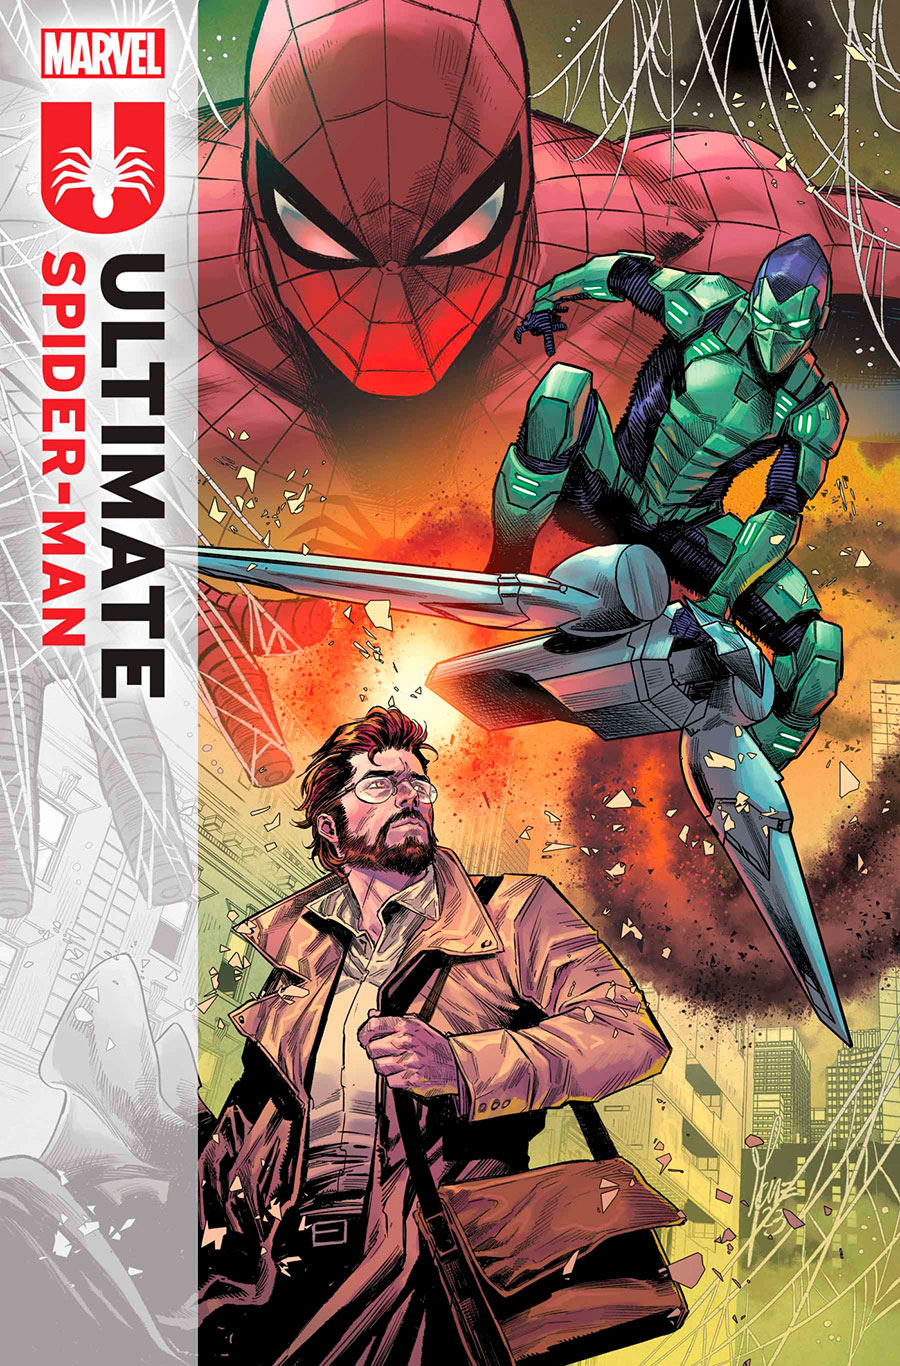 Marvel Subscriptions :: Never miss an issue of Avengers, Spider-Man, X-Men  & more Marvel Comics